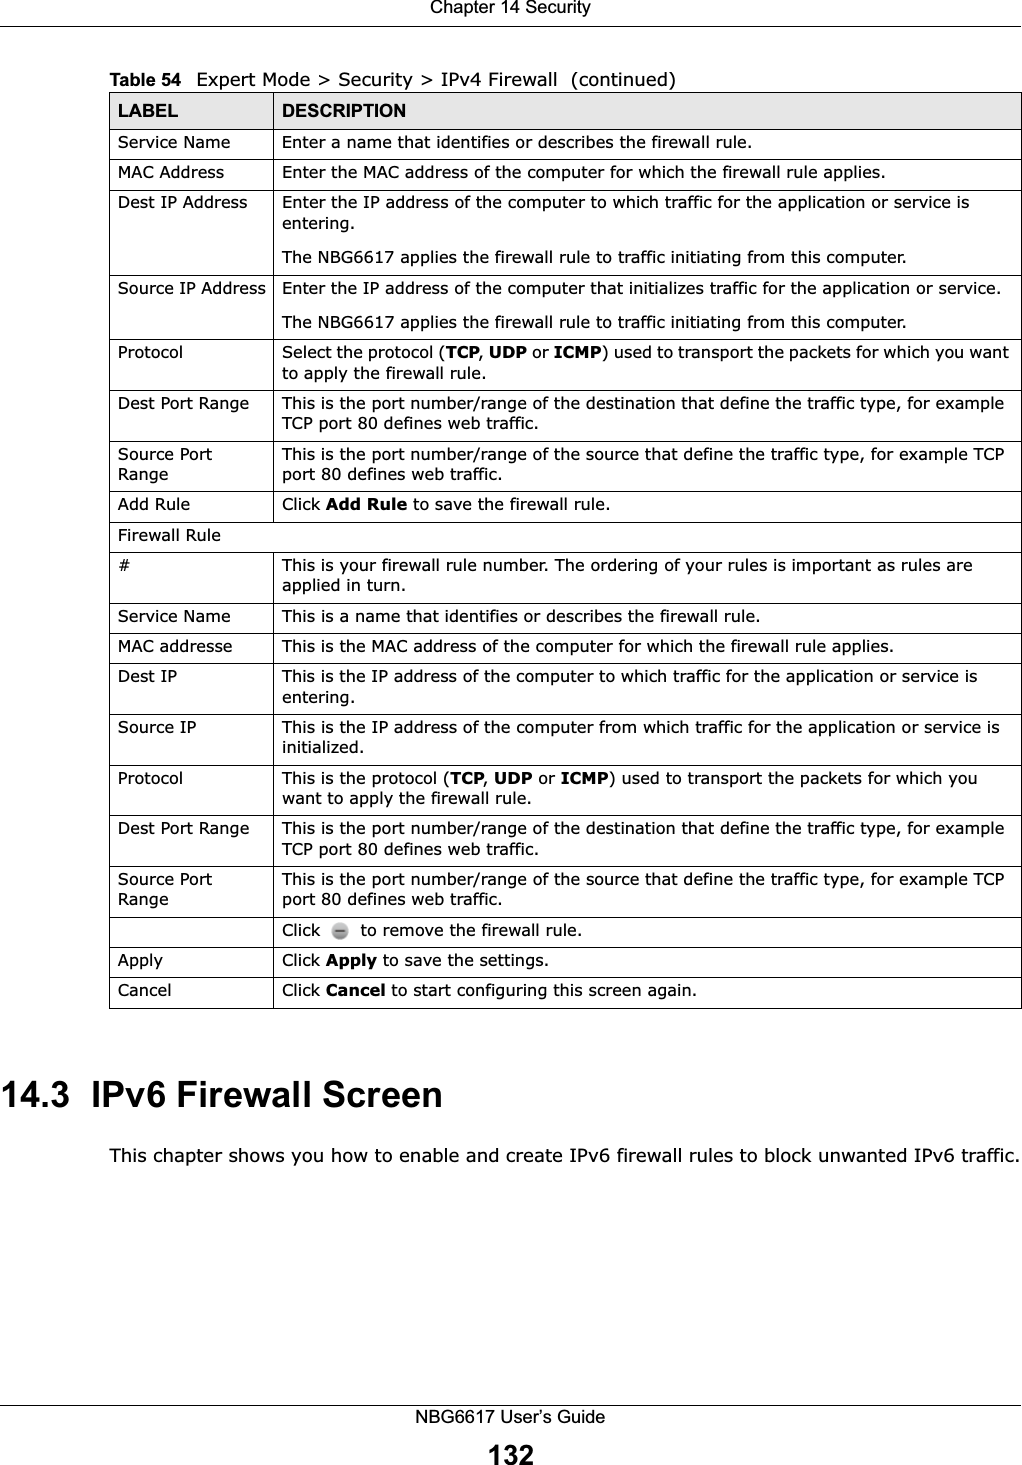 Chapter 14 SecurityNBG6617 User’s Guide13214.3  IPv6 Firewall Screen This chapter shows you how to enable and create IPv6 firewall rules to block unwanted IPv6 traffic.Service Name Enter a name that identifies or describes the firewall rule.MAC Address Enter the MAC address of the computer for which the firewall rule applies.Dest IP Address Enter the IP address of the computer to which traffic for the application or service is entering. The NBG6617 applies the firewall rule to traffic initiating from this computer. Source IP Address Enter the IP address of the computer that initializes traffic for the application or service.The NBG6617 applies the firewall rule to traffic initiating from this computer.Protocol  Select the protocol (TCP, UDP or ICMP) used to transport the packets for which you want to apply the firewall rule.Dest Port Range This is the port number/range of the destination that define the traffic type, for example TCP port 80 defines web traffic.Source Port RangeThis is the port number/range of the source that define the traffic type, for example TCP port 80 defines web traffic.Add Rule Click Add Rule to save the firewall rule. Firewall Rule# This is your firewall rule number. The ordering of your rules is important as rules are applied in turn. Service Name This is a name that identifies or describes the firewall rule.MAC addresse This is the MAC address of the computer for which the firewall rule applies.Dest IP This is the IP address of the computer to which traffic for the application or service is entering. Source IP This is the IP address of the computer from which traffic for the application or service is initialized. Protocol This is the protocol (TCP, UDP or ICMP) used to transport the packets for which you want to apply the firewall rule. Dest Port Range This is the port number/range of the destination that define the traffic type, for example TCP port 80 defines web traffic.Source Port RangeThis is the port number/range of the source that define the traffic type, for example TCP port 80 defines web traffic.Click   to remove the firewall rule.Apply Click Apply to save the settings. Cancel Click Cancel to start configuring this screen again. Table 54   Expert Mode &gt; Security &gt; IPv4 Firewall  (continued)LABEL DESCRIPTION